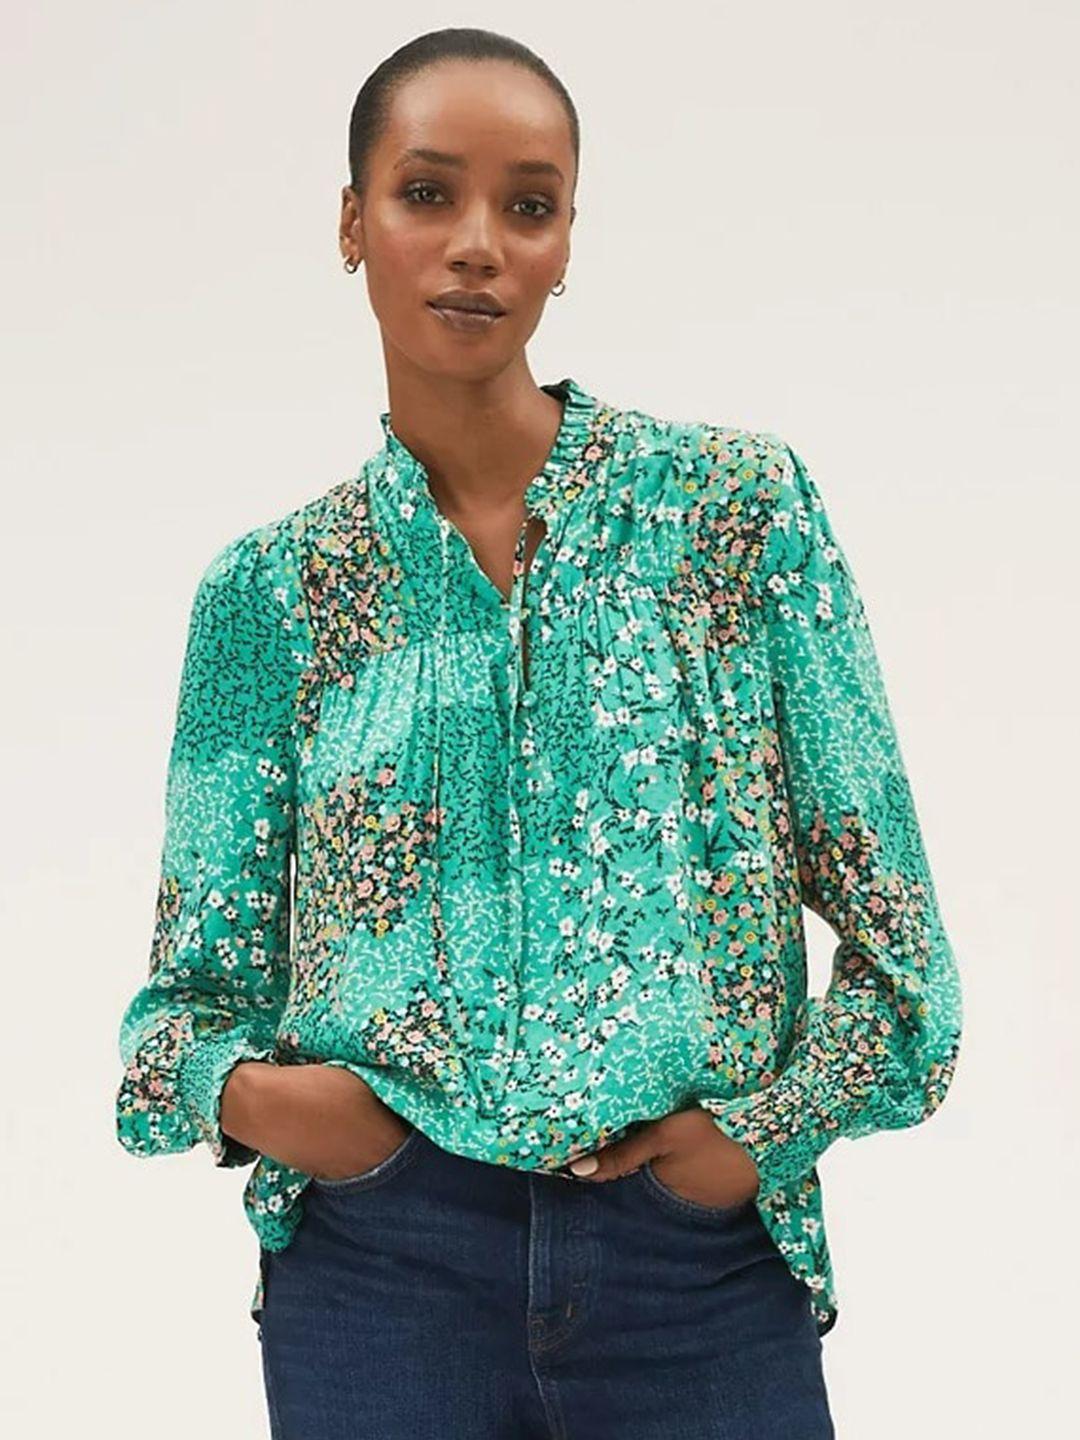 marks & spencer green floral print tie-up neck shirt style top